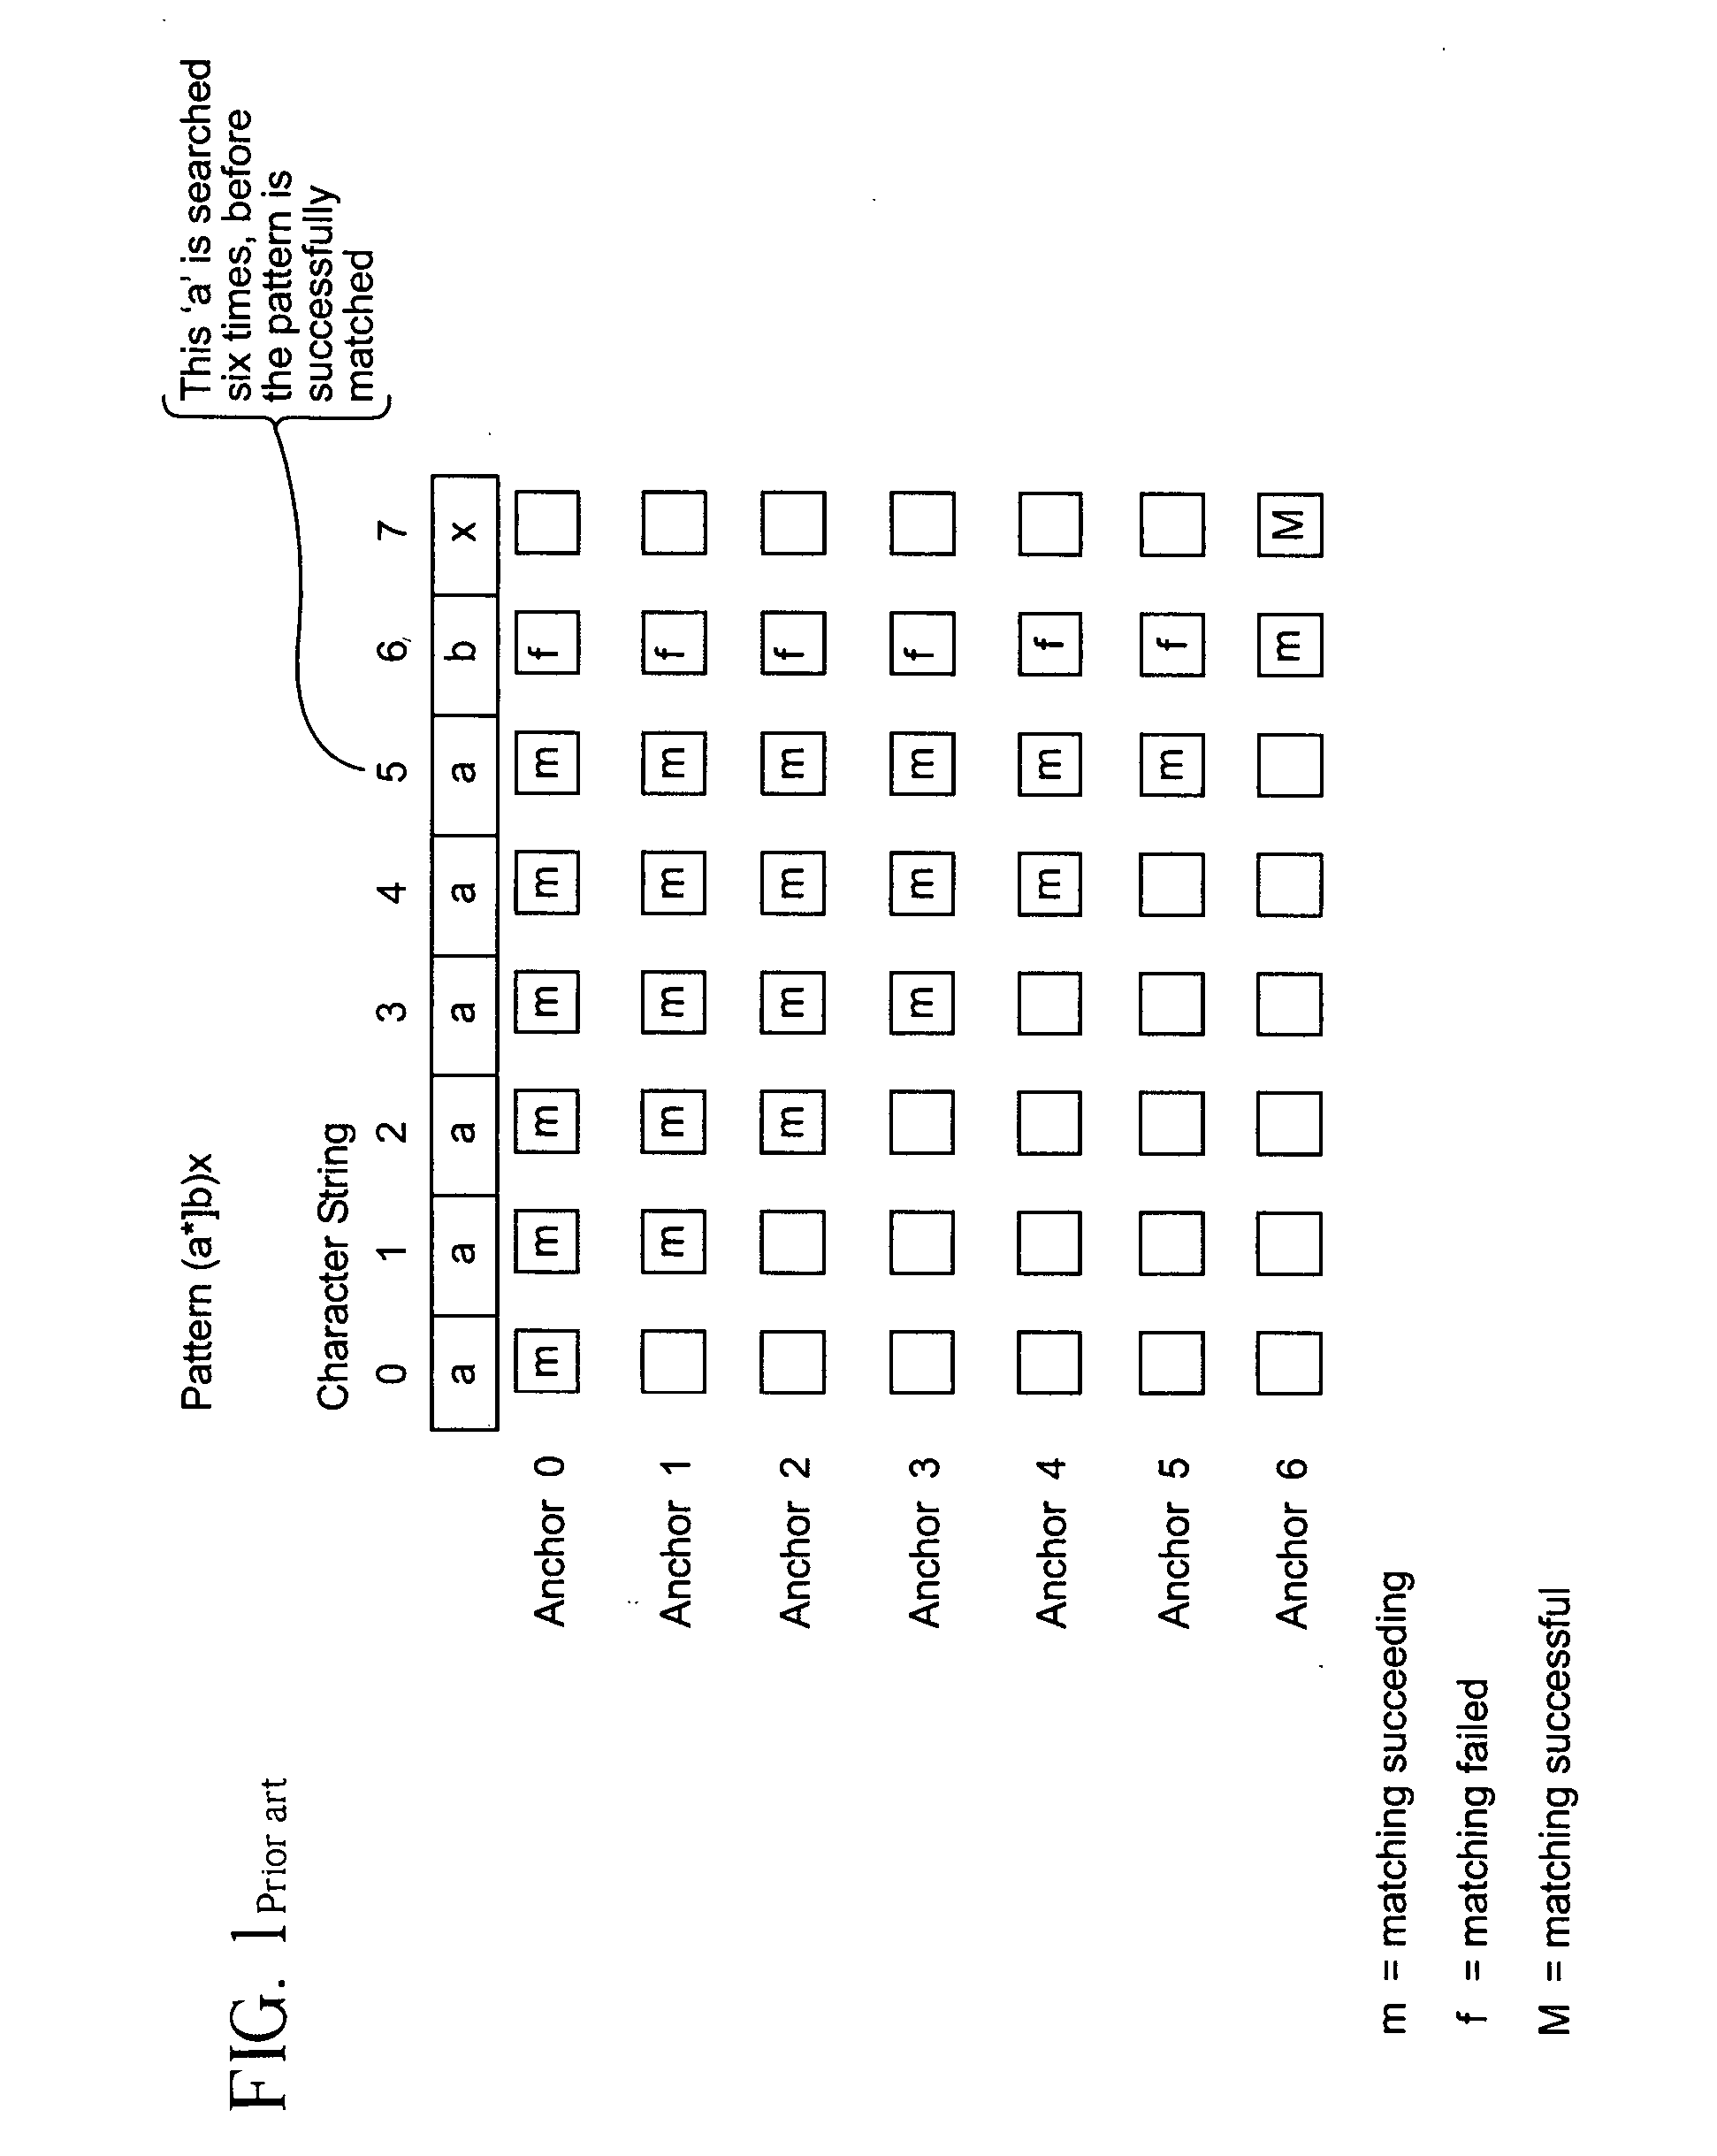 System and method for determining the start of a match of a regular expression